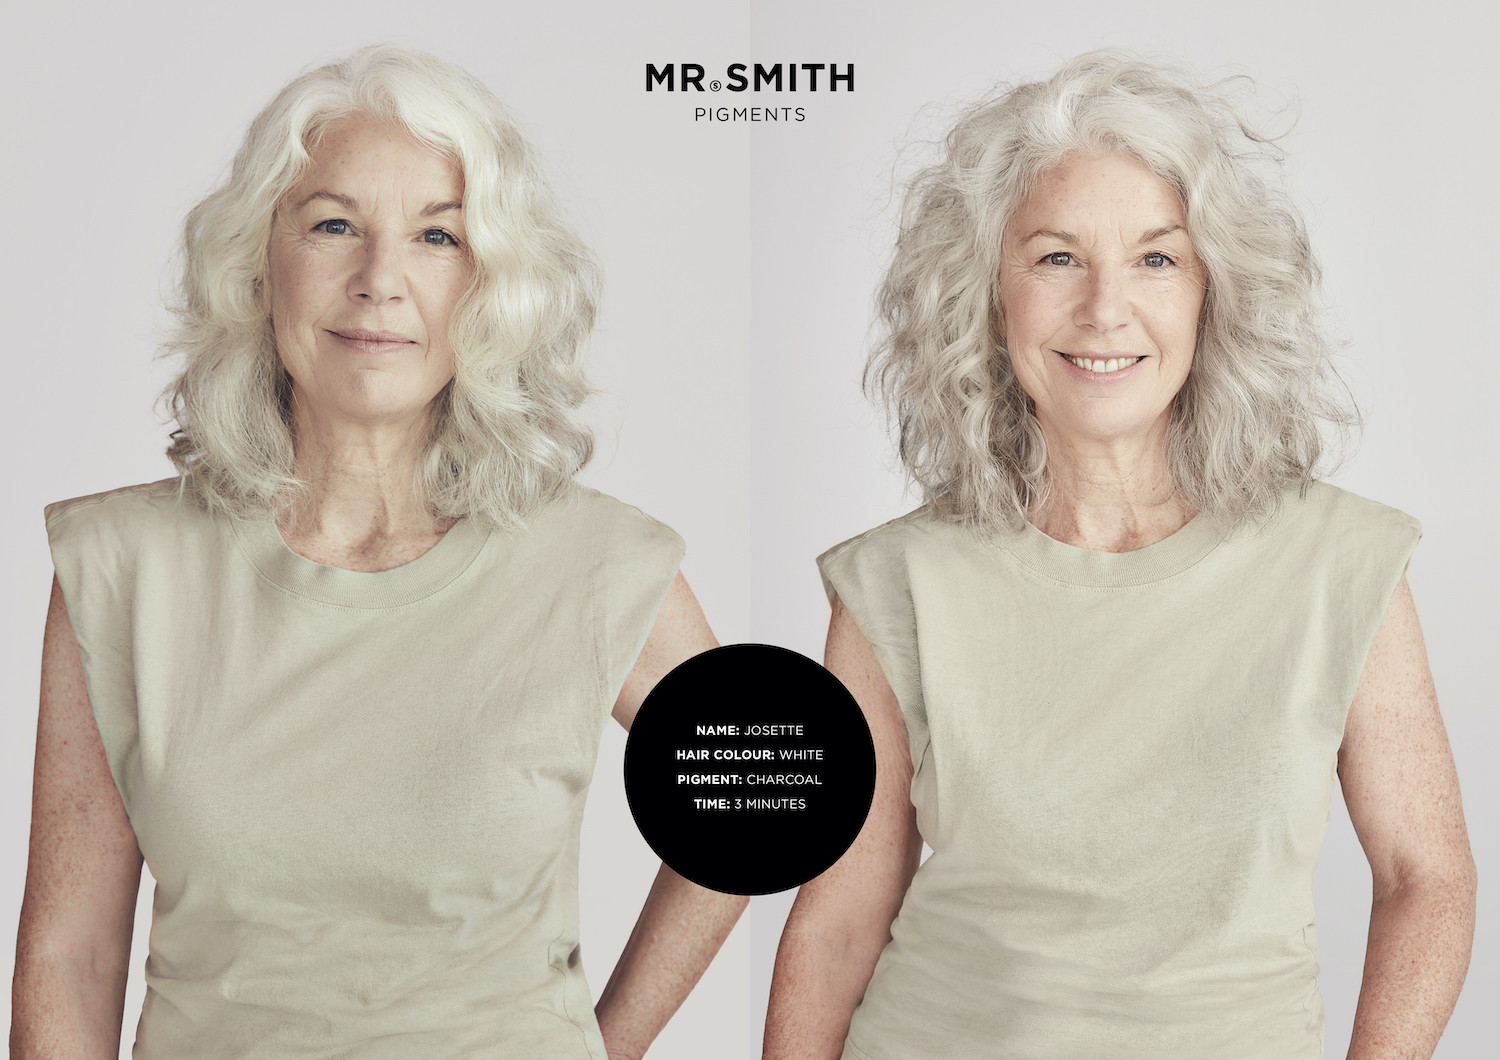 NEWS: MR. SMITH LAUNCHES HAIR PIGMENTS – THE JOURNAL MAG